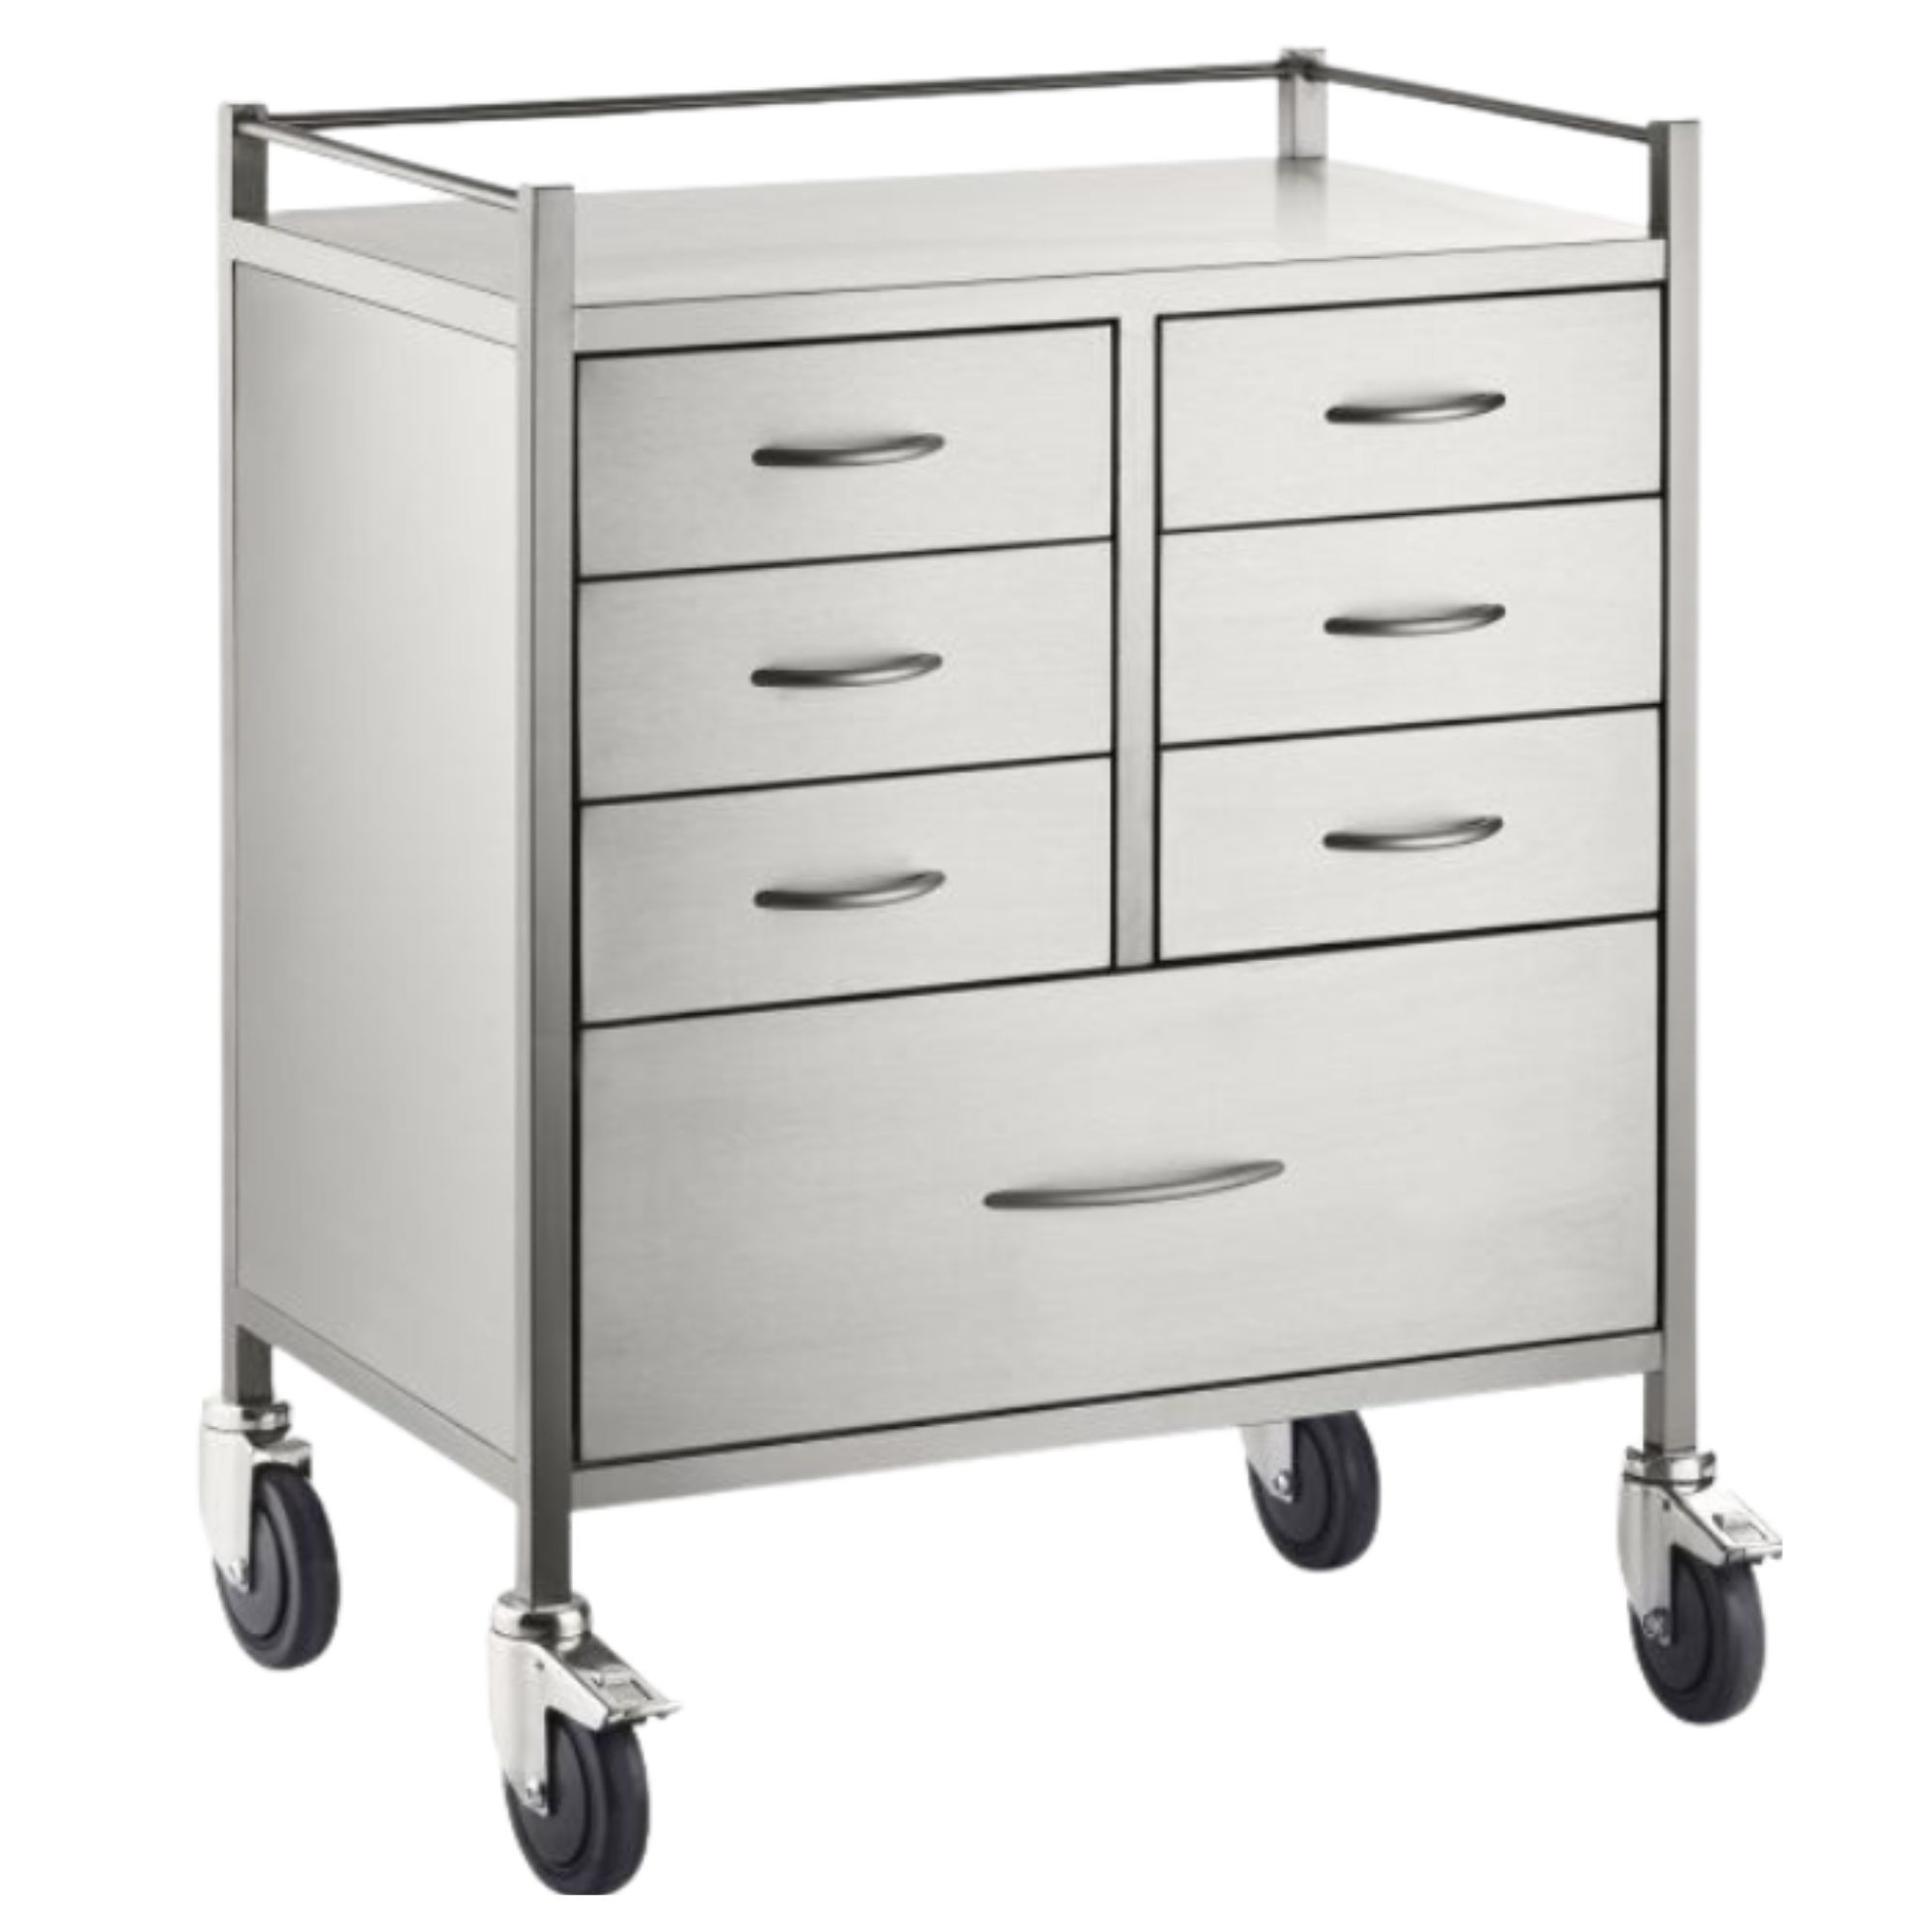 Stainless Steel Resuscitation Trolley Seven Drawer